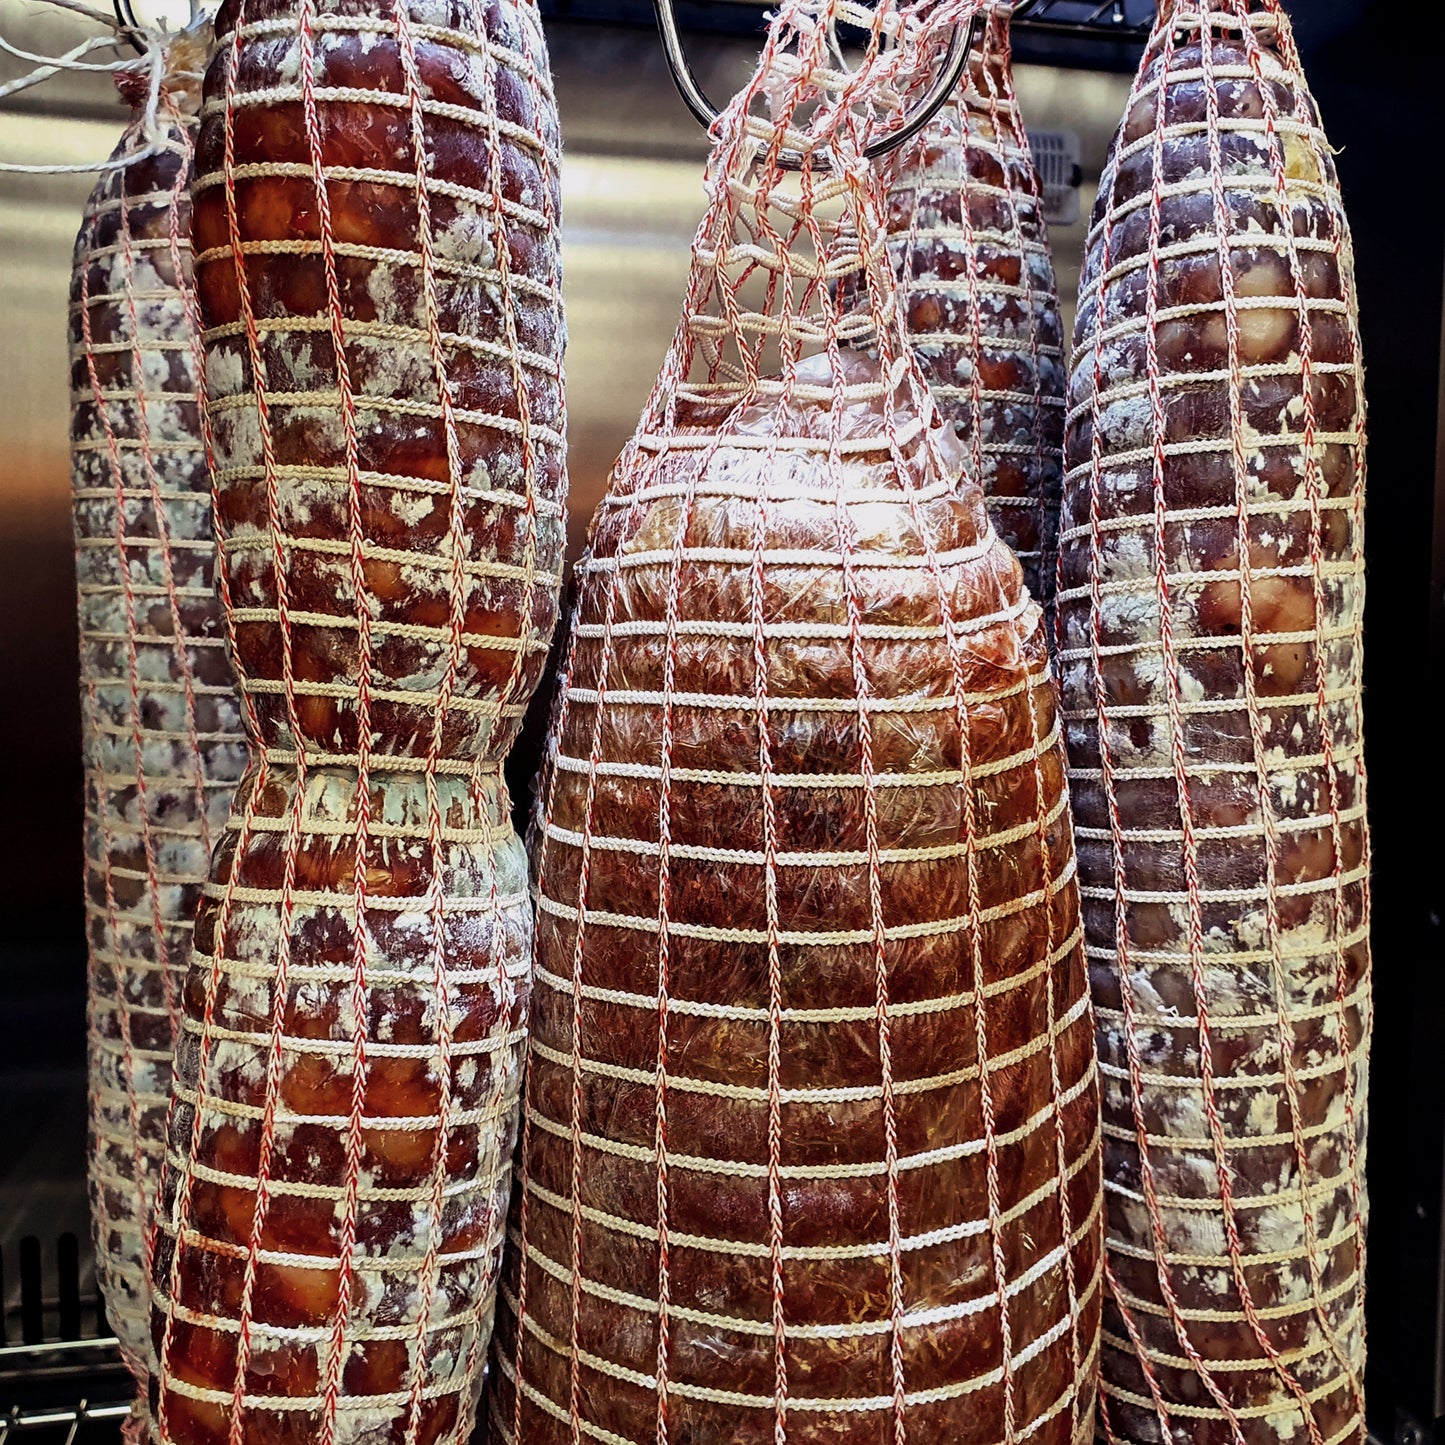 Salami netting used for holding salami shape while curing. 